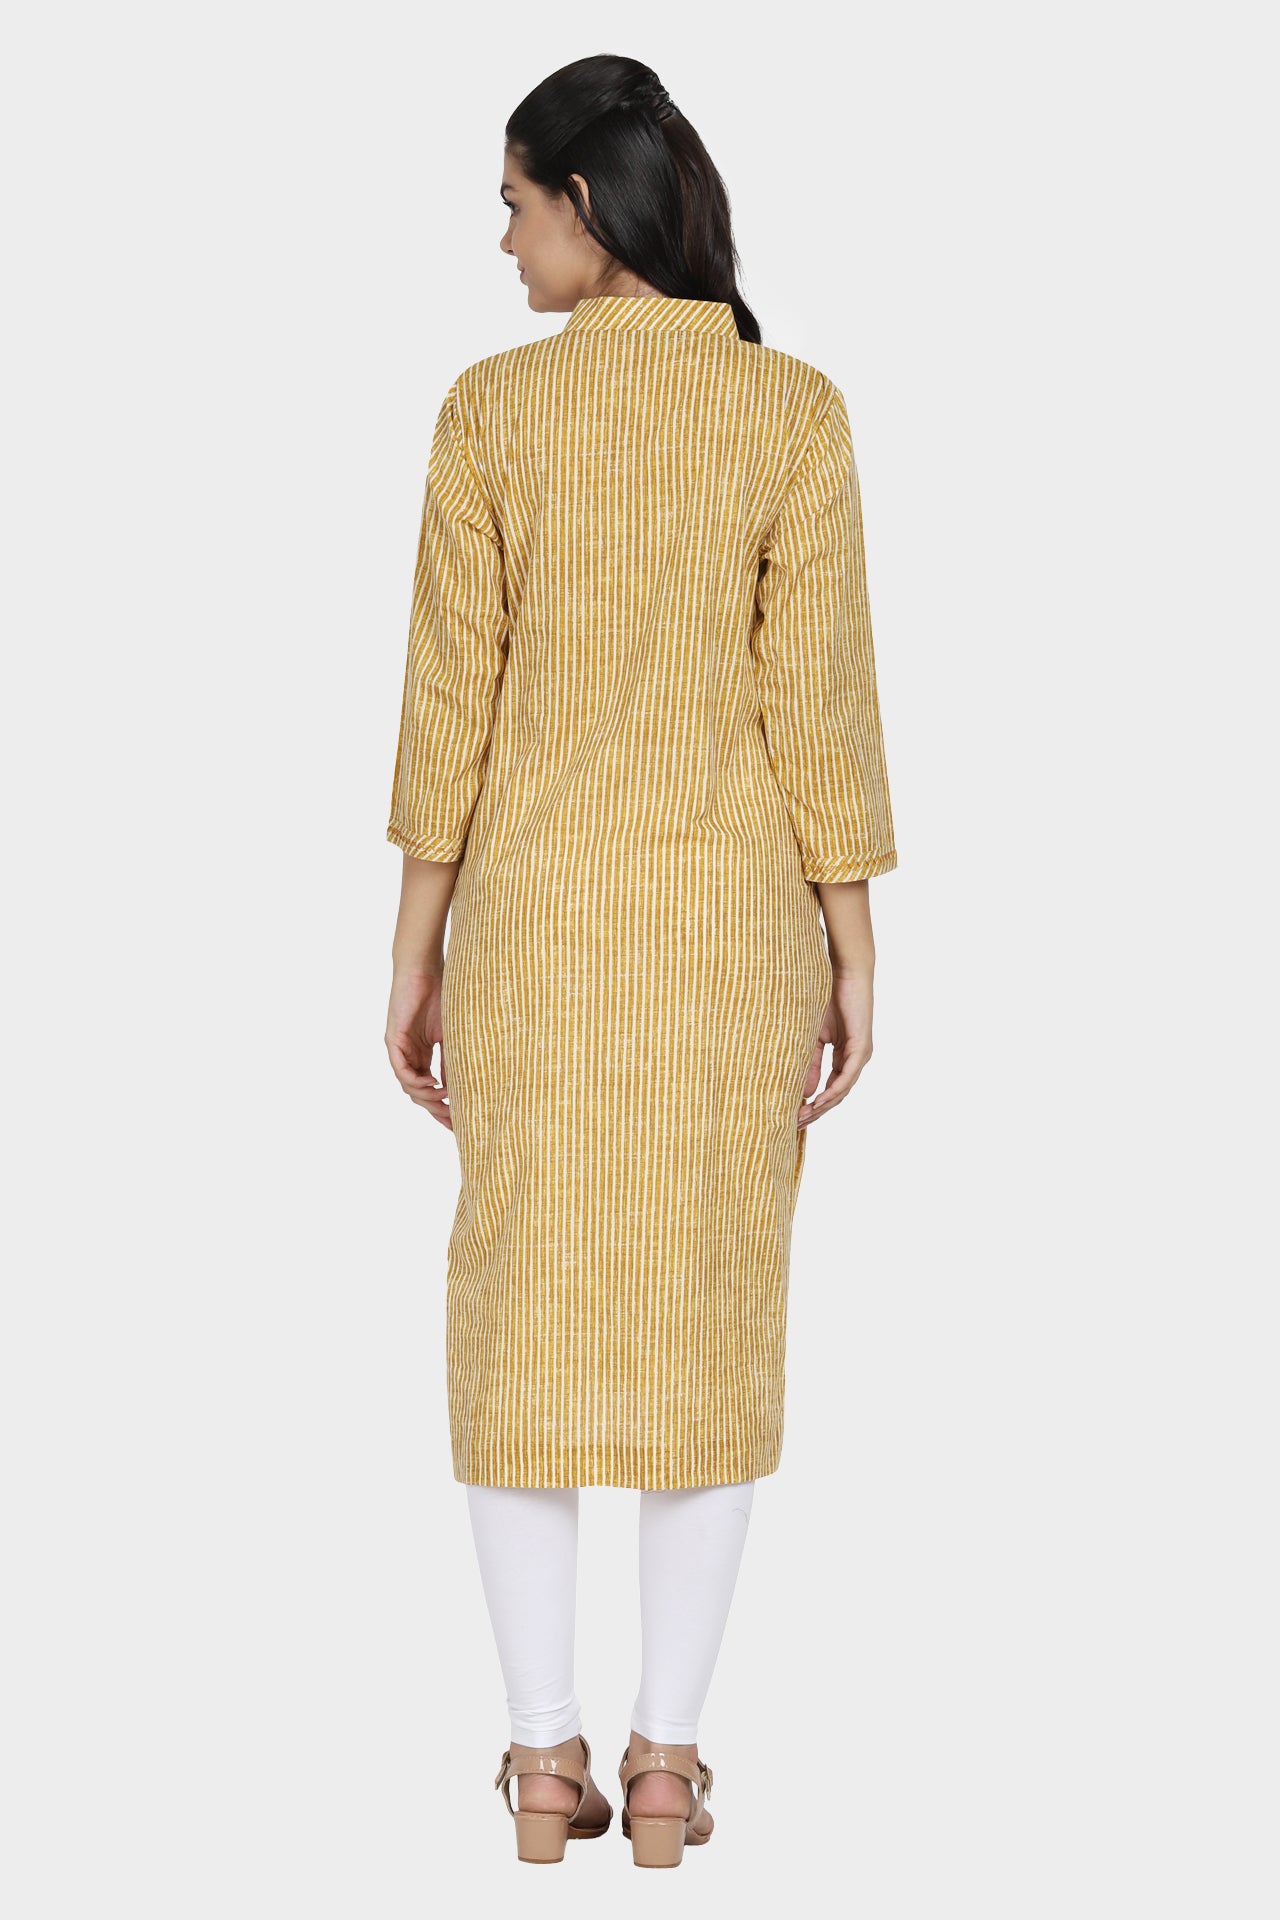 Yellow Striped Cotton Kurta with V-Neck Stand Collar & Designer Sleeves